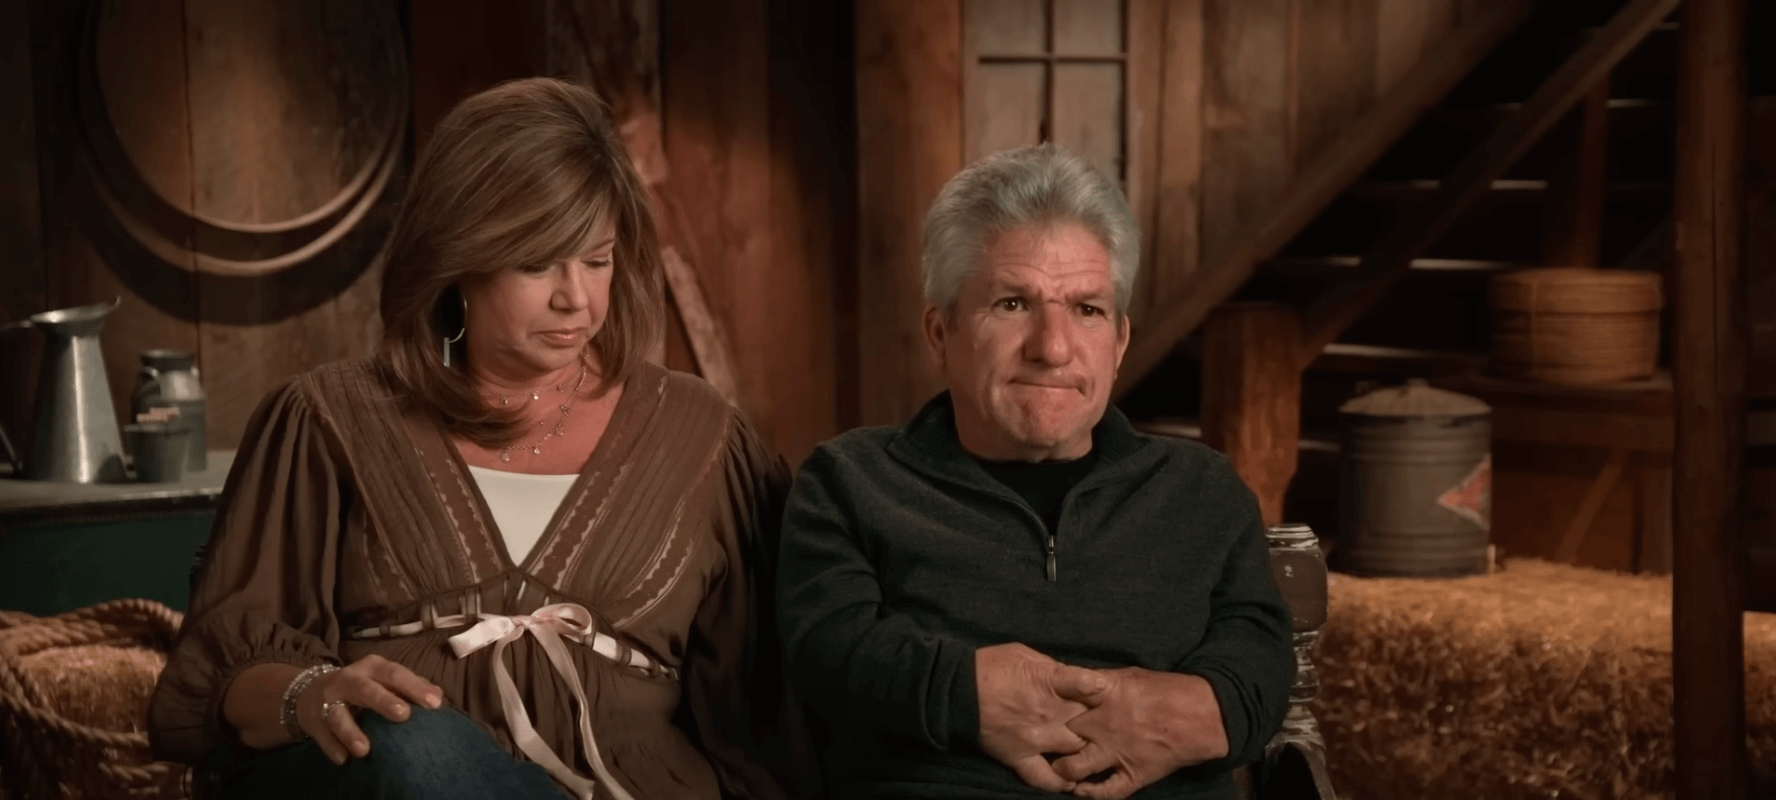 'Little People, Big World' stars Matt Roloff and Caryn Chandler sitting next to each other on a couch